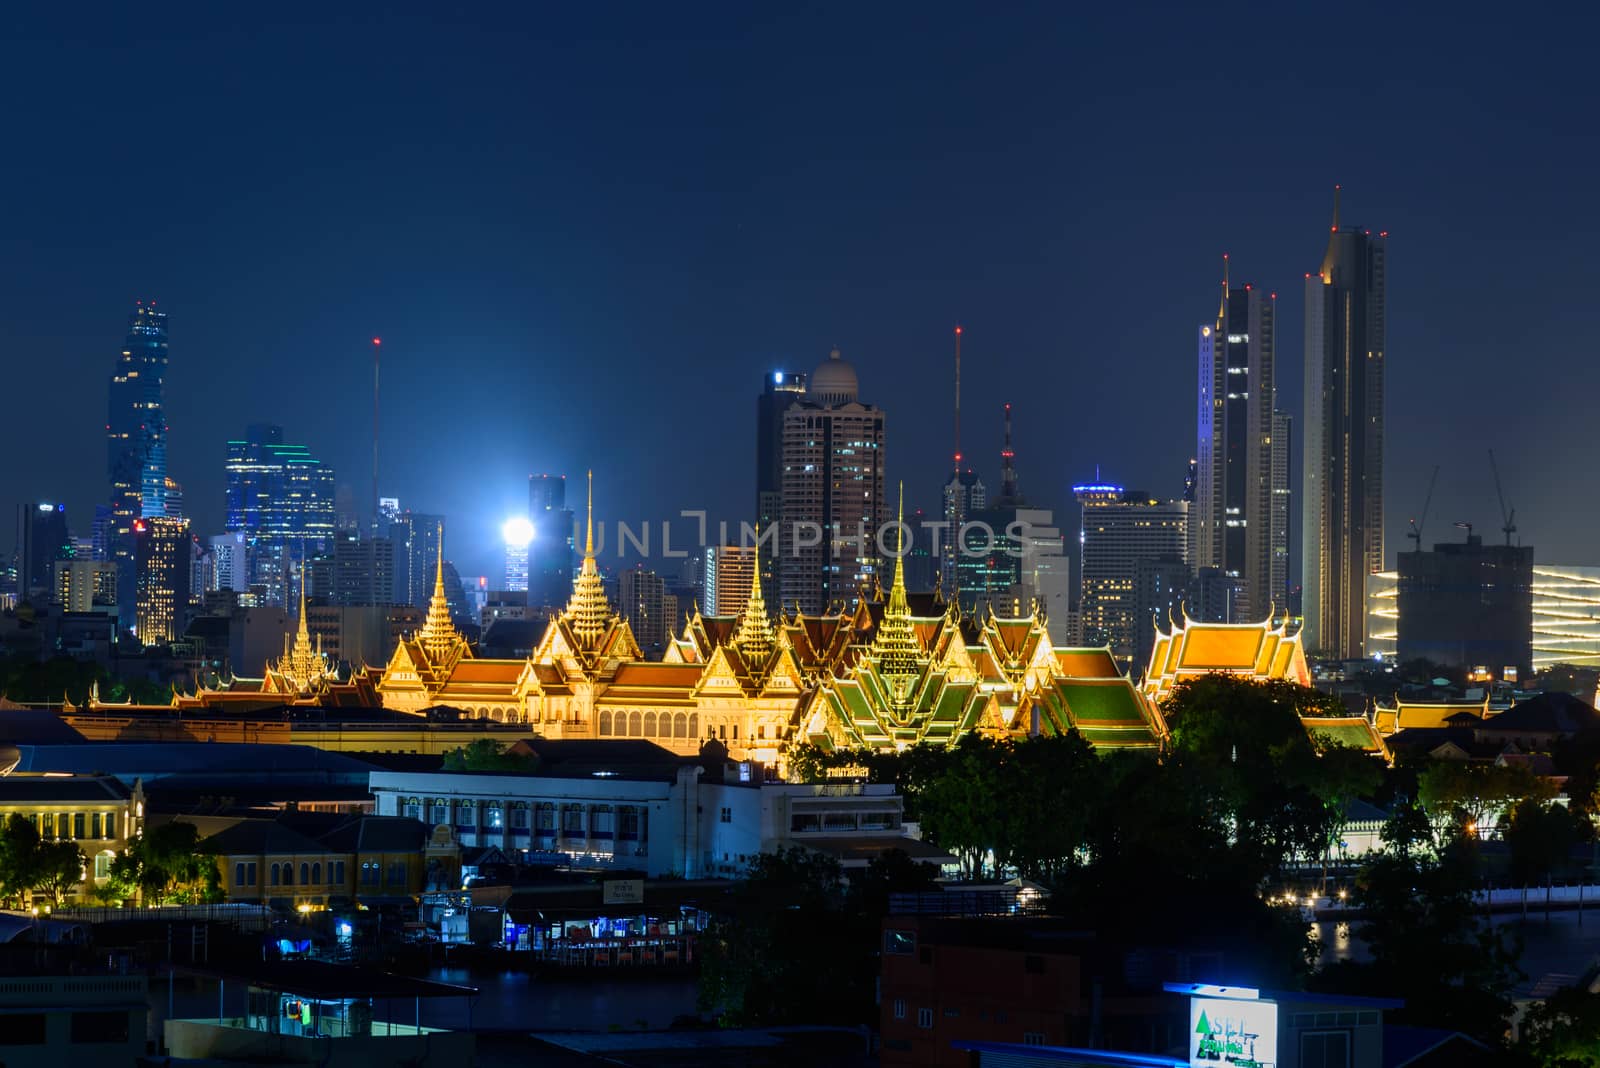 Bangkok , Thailand - 19 June, 2020: Wat Phra Keaw Public landmark of Thailand in night time and city in background by rukawajung